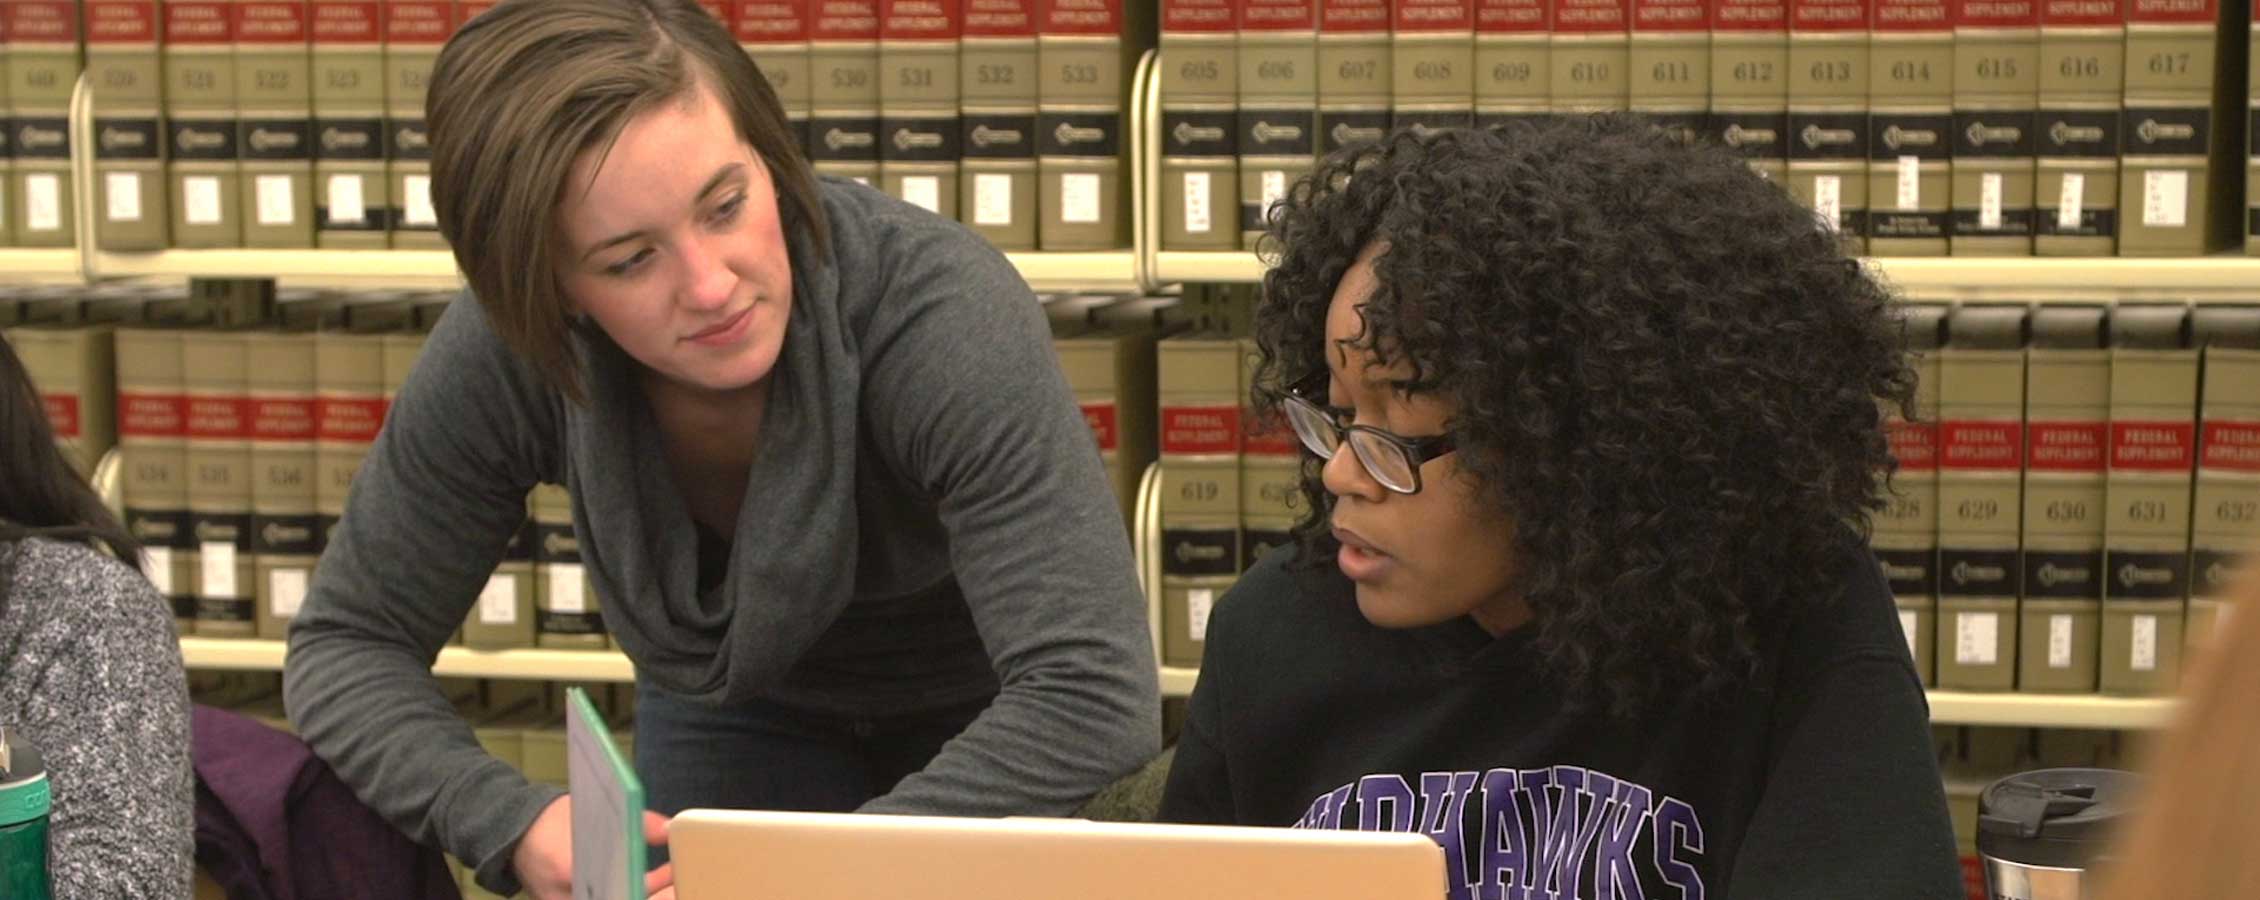 Two students study in the library.